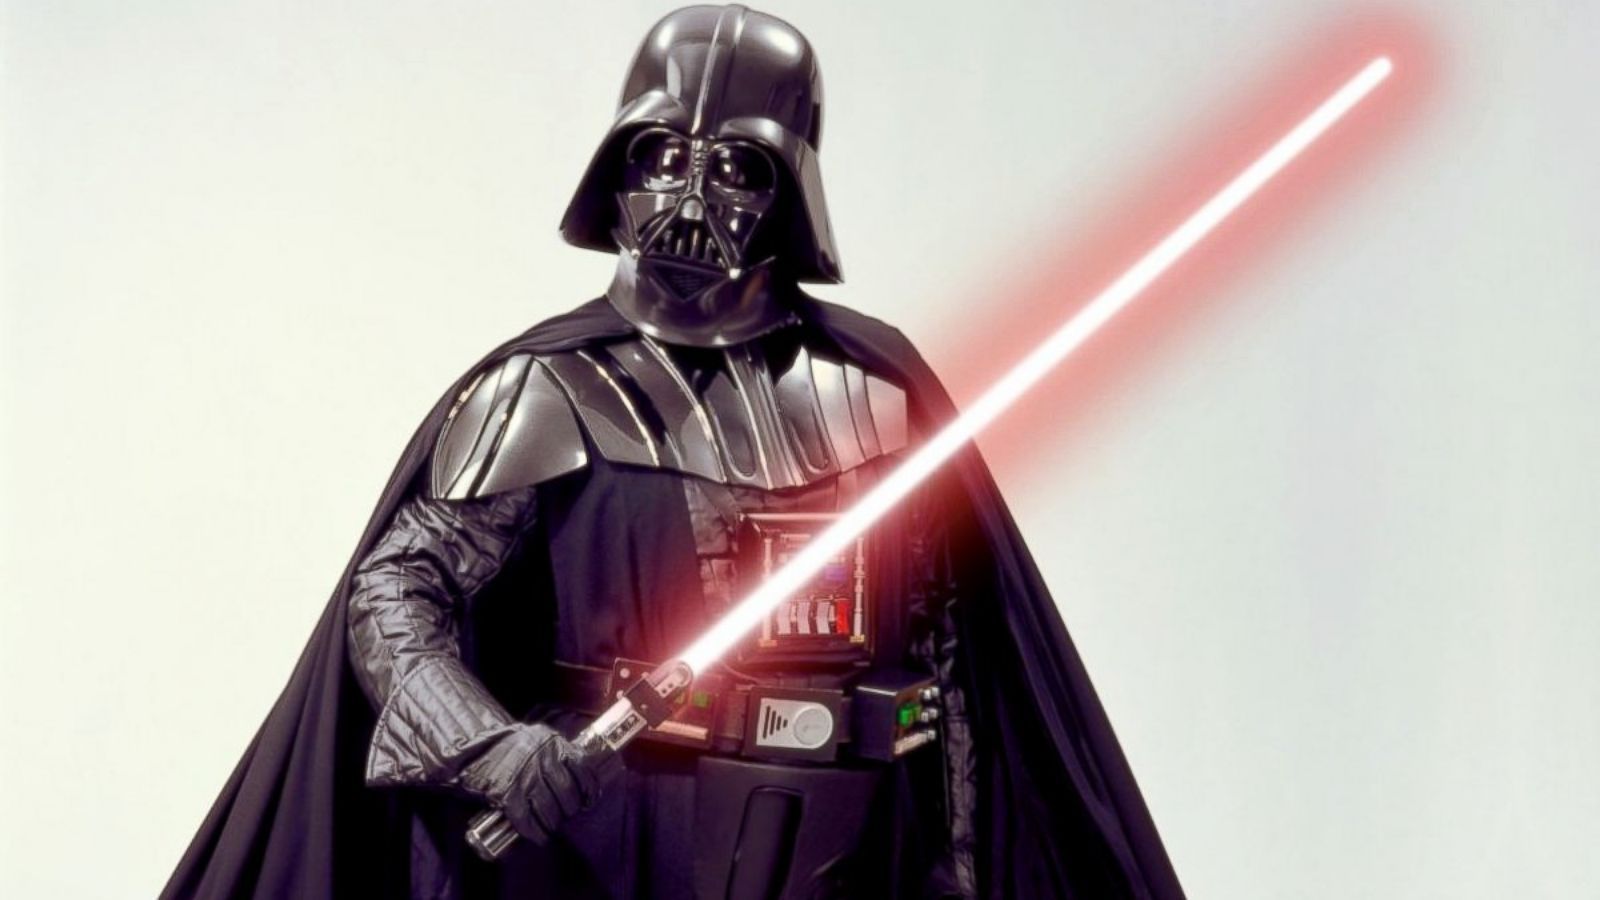 Who would win, Purple Guy or Darth Vader? - Quora